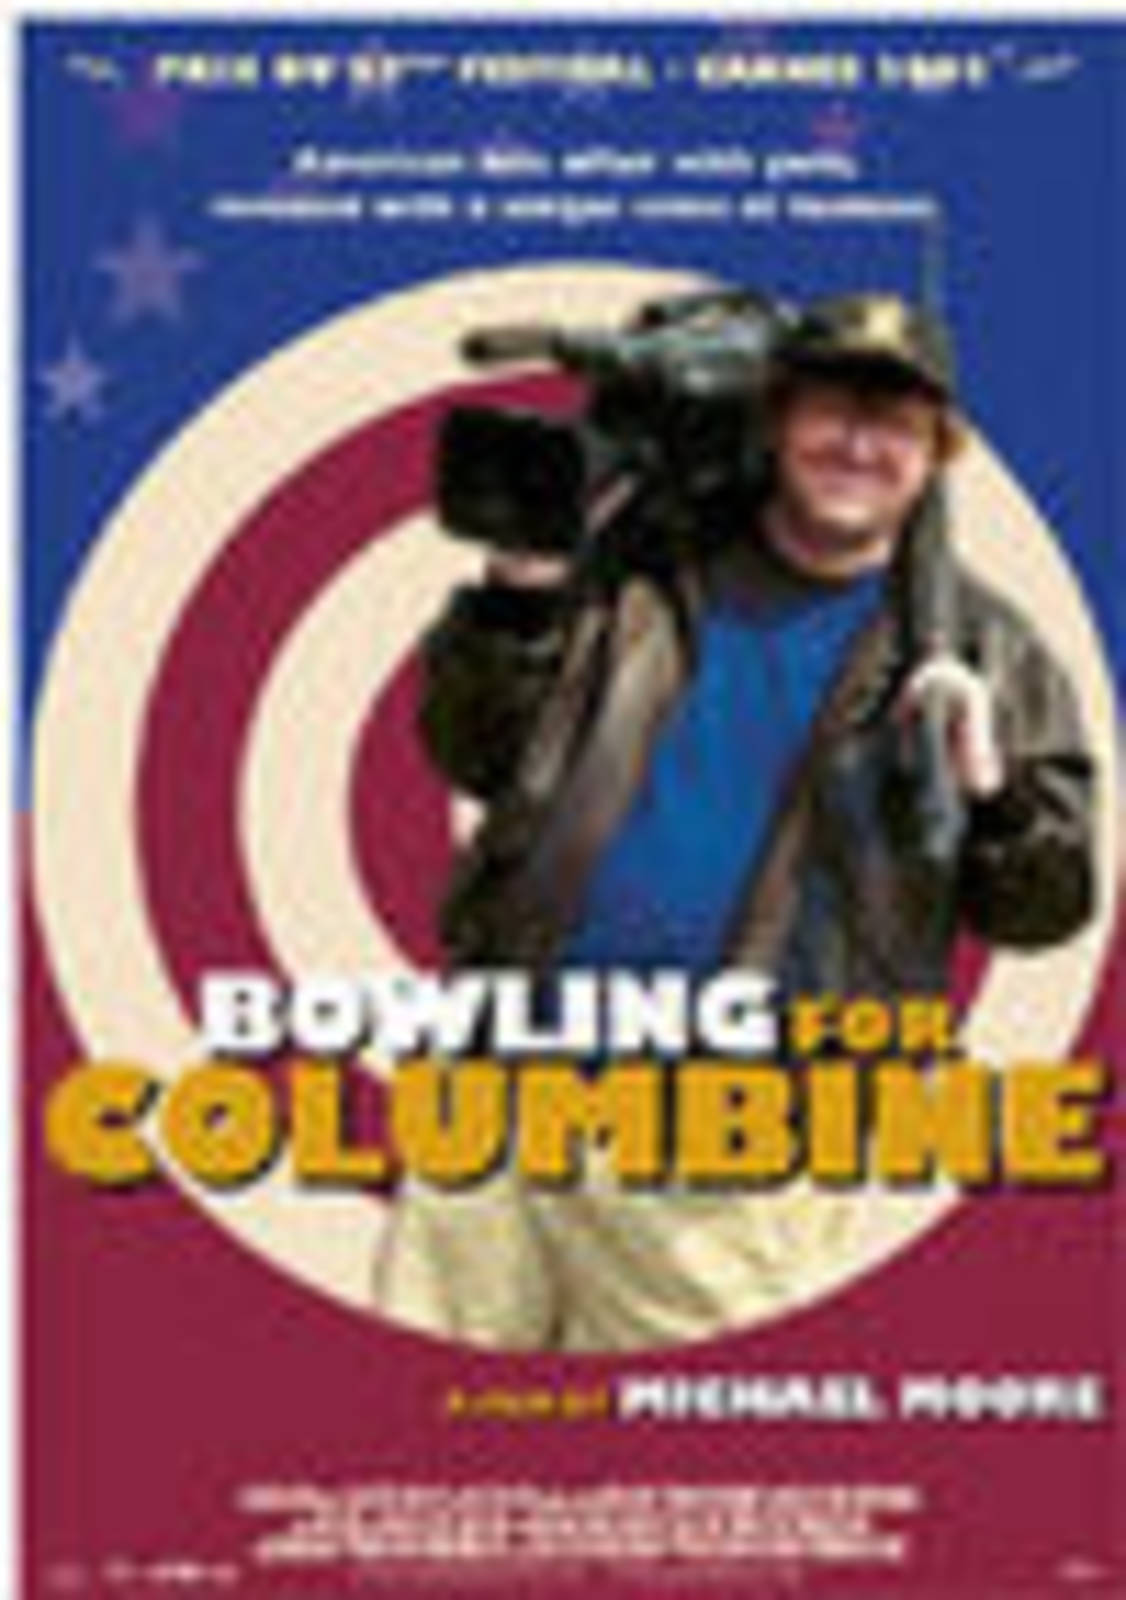 Bowling for columbine essay